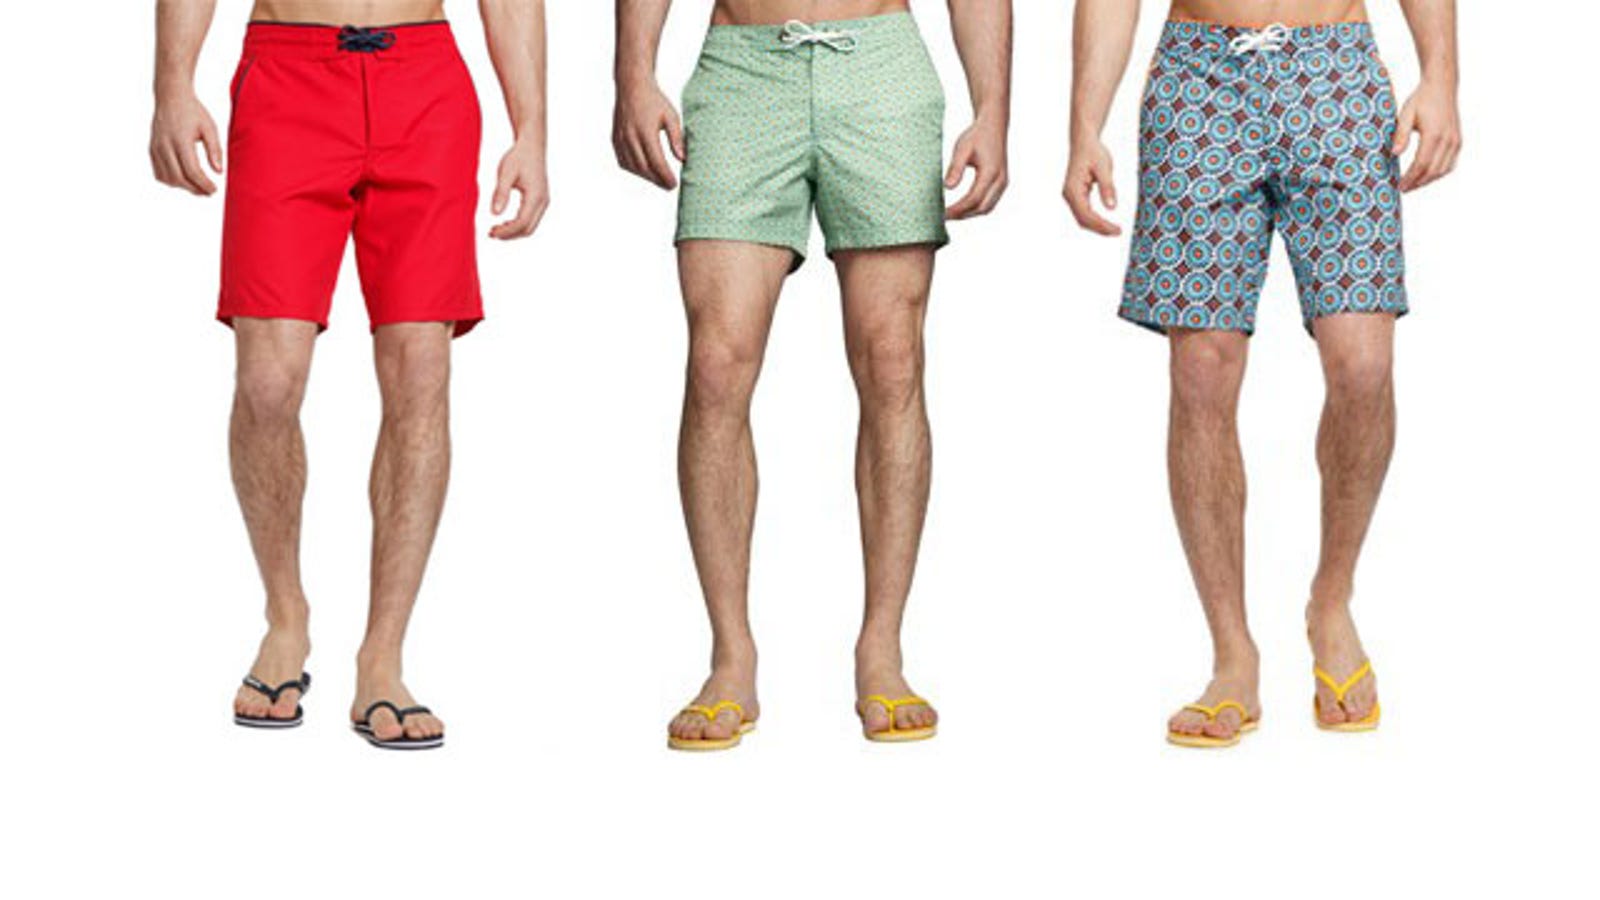 Do You Wear Board Shorts or Swim Trunks? Either Way, You Need New Ones